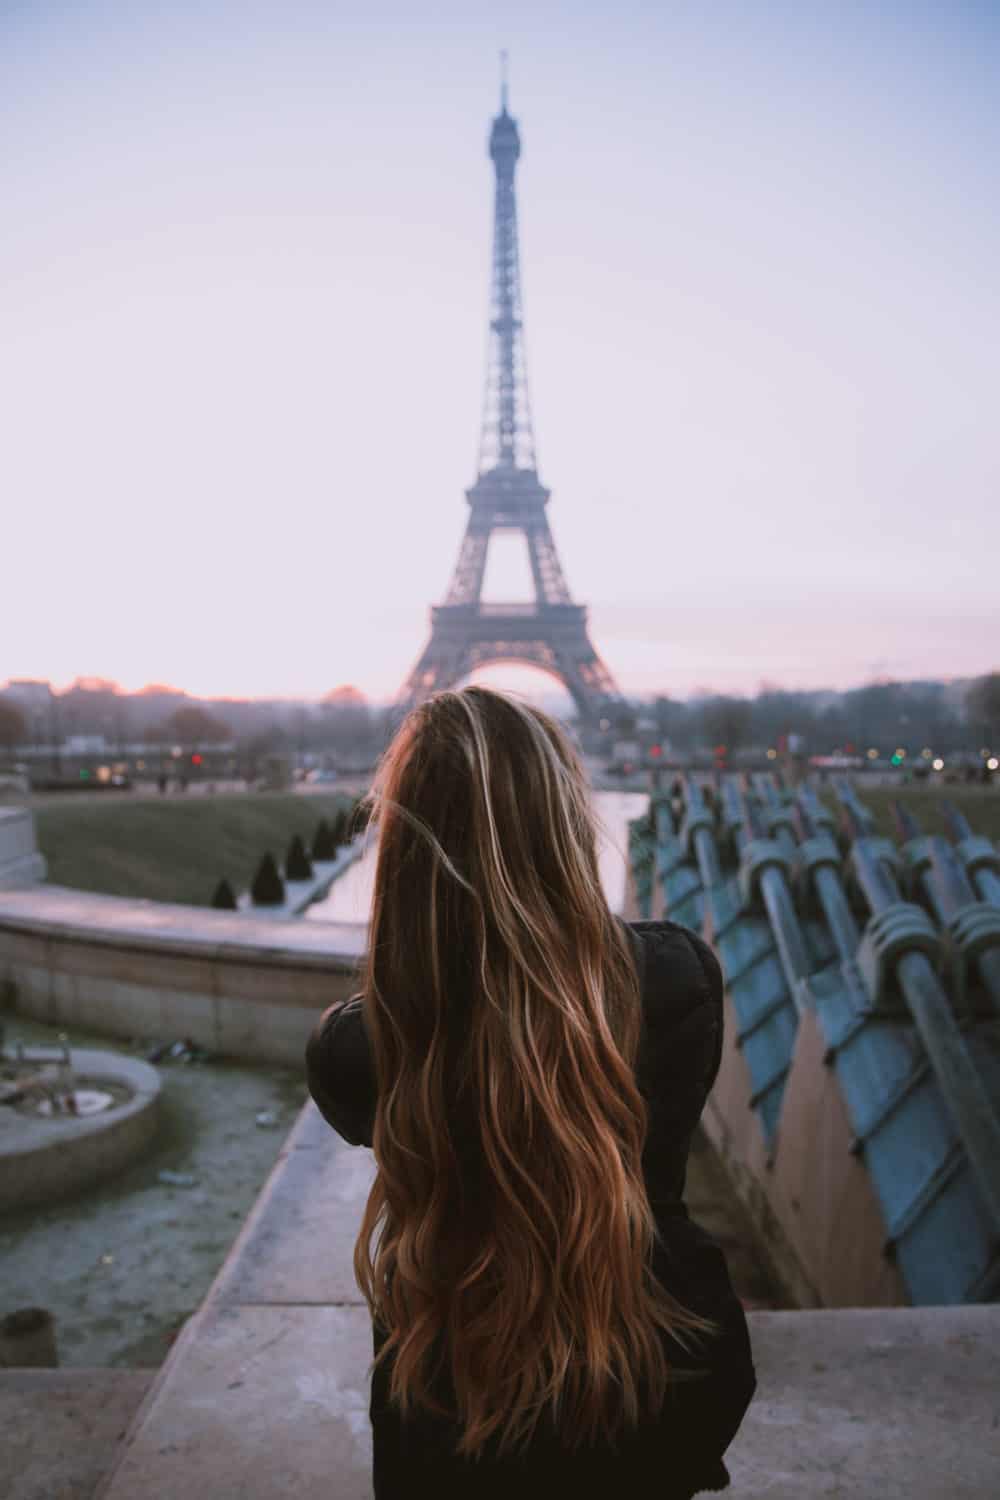 Discover the best photography spots in Paris, France in this all-inclusive post! We're including iconic favorites like the Eiffel Tower and Champs Elyssse, but also hidden gems like Saint Chapelle and Musee d'Orsay Clocks. Find the best Instagram spots in Paris here! #paris #france #eiffeltower #photography #french #instagram #laduree #champselysees #museedorsay #arcdetriomphe #louvre #macaron #europe